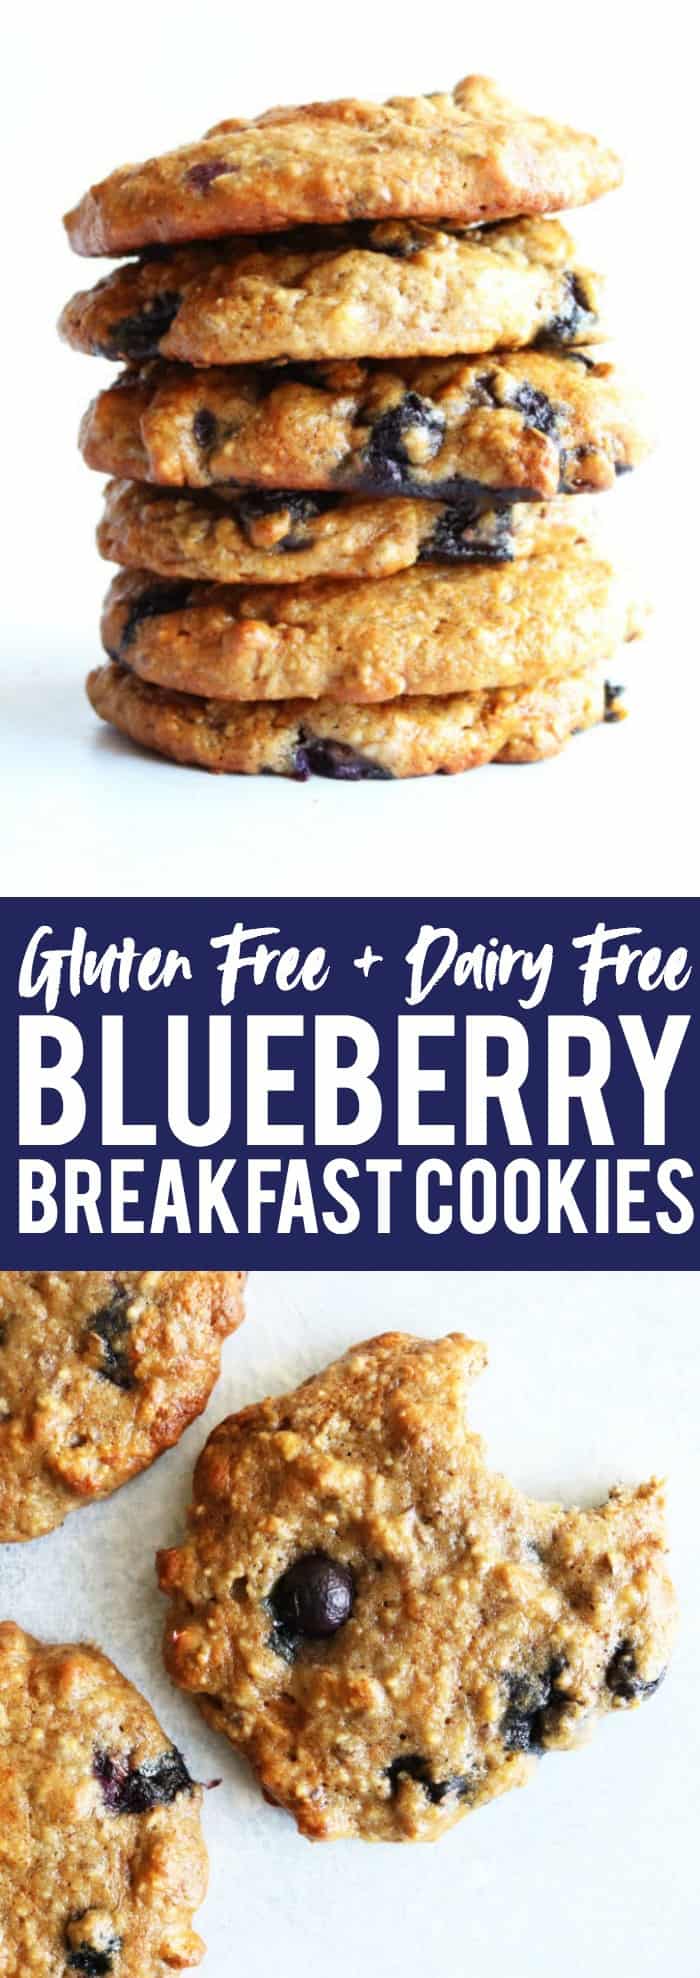 Eat cookies for breakfast without the guilt! These are low carb, gluten free, and paleo-friendly cookies that even your kids will love! thetoastedpinenut.com #glutenfree #paleo #breakfast #dairyfree